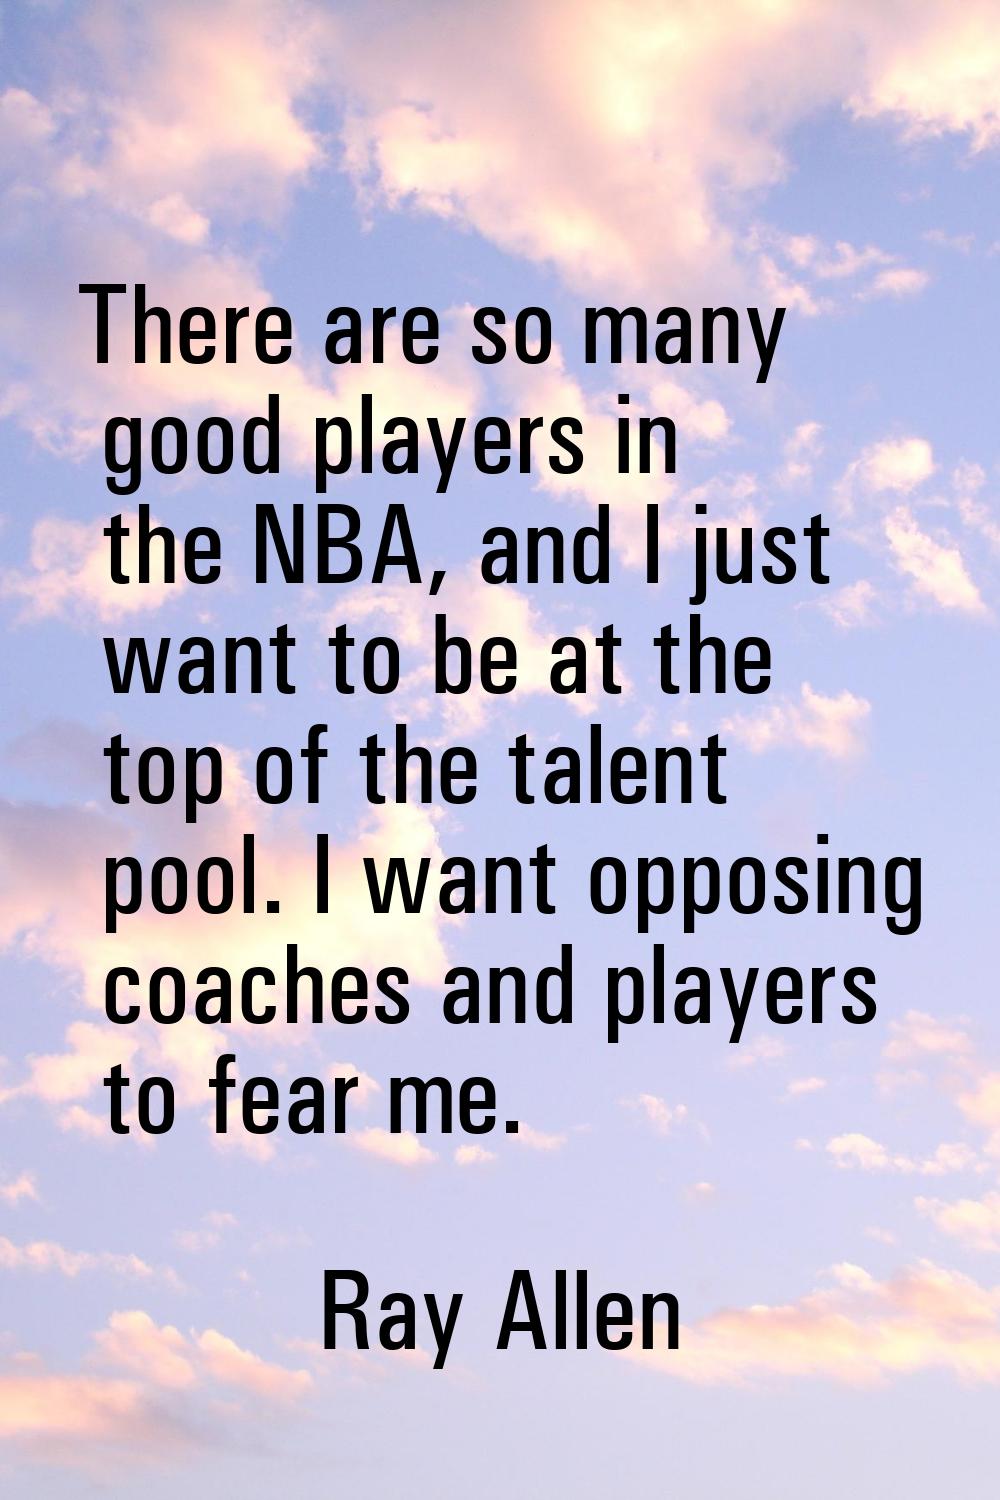 There are so many good players in the NBA, and I just want to be at the top of the talent pool. I w